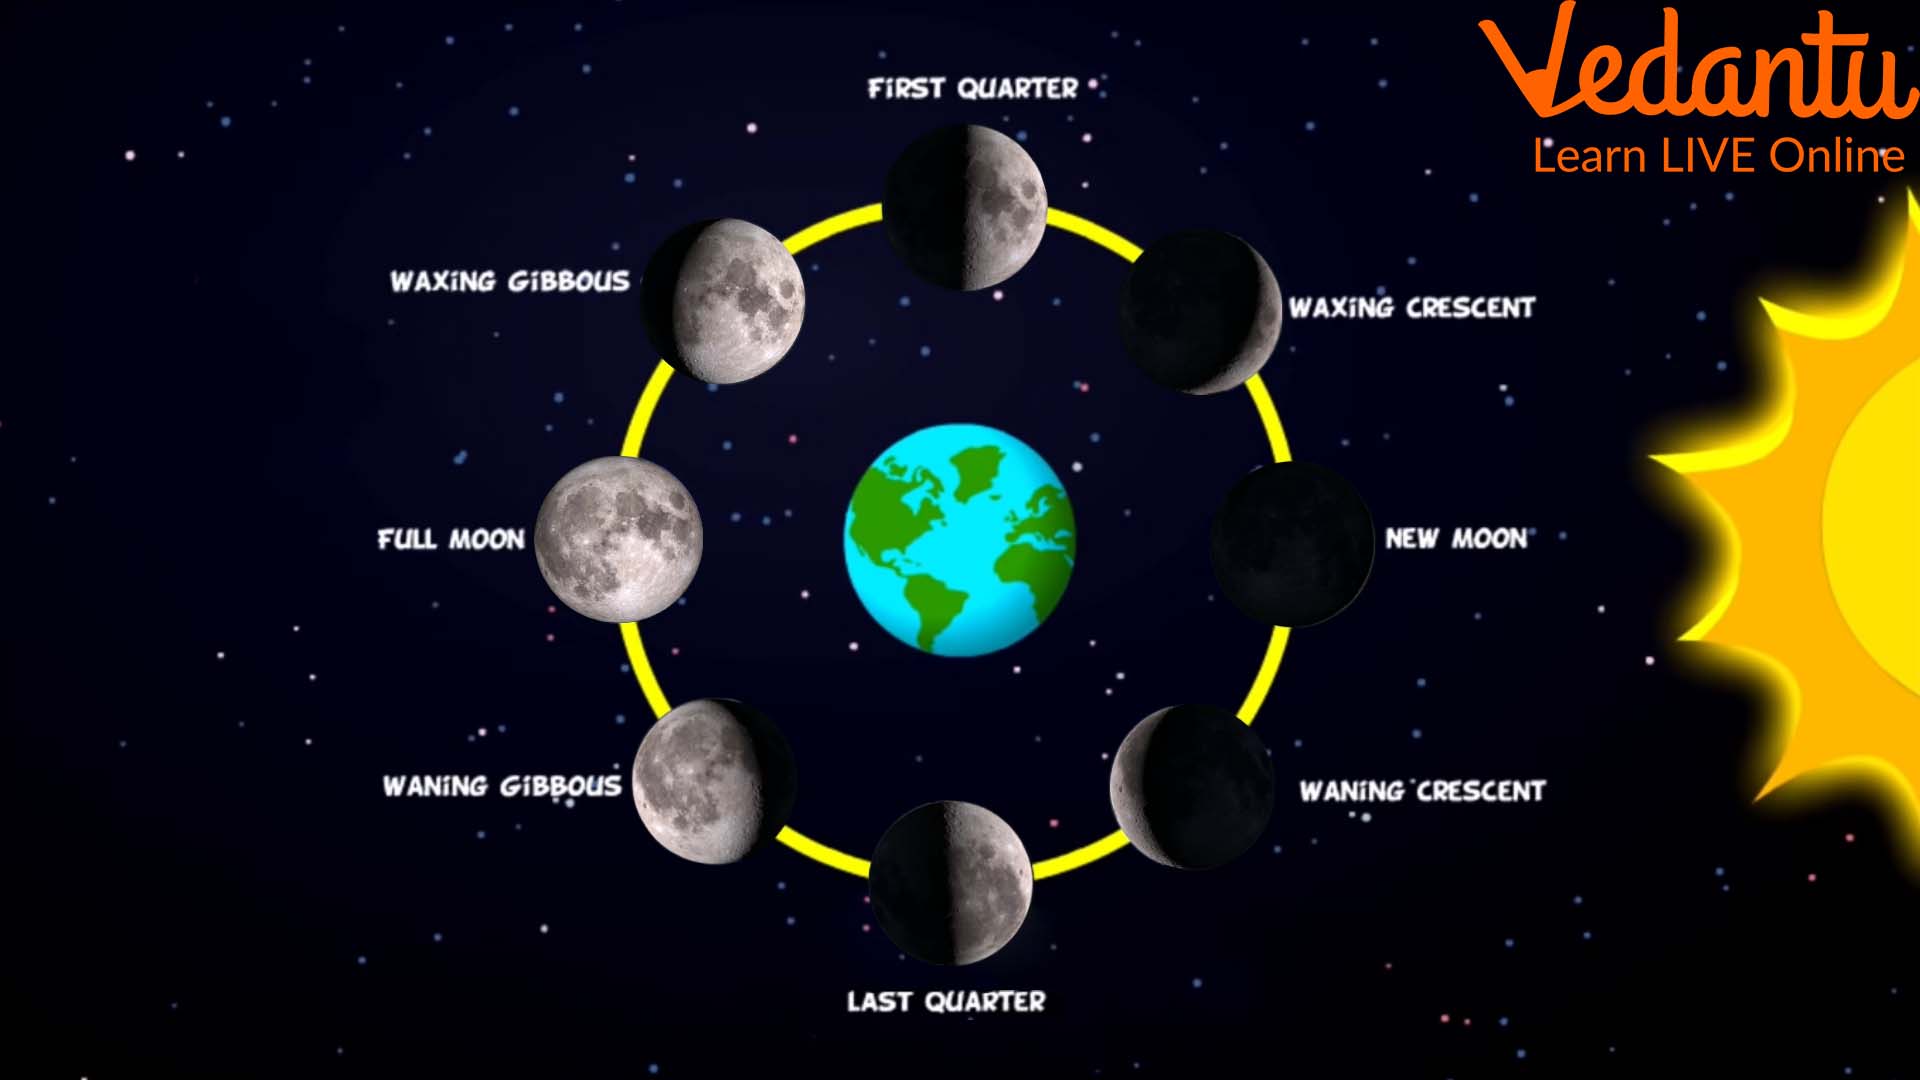 Track These Moon Shapes and Find Out What They are Called